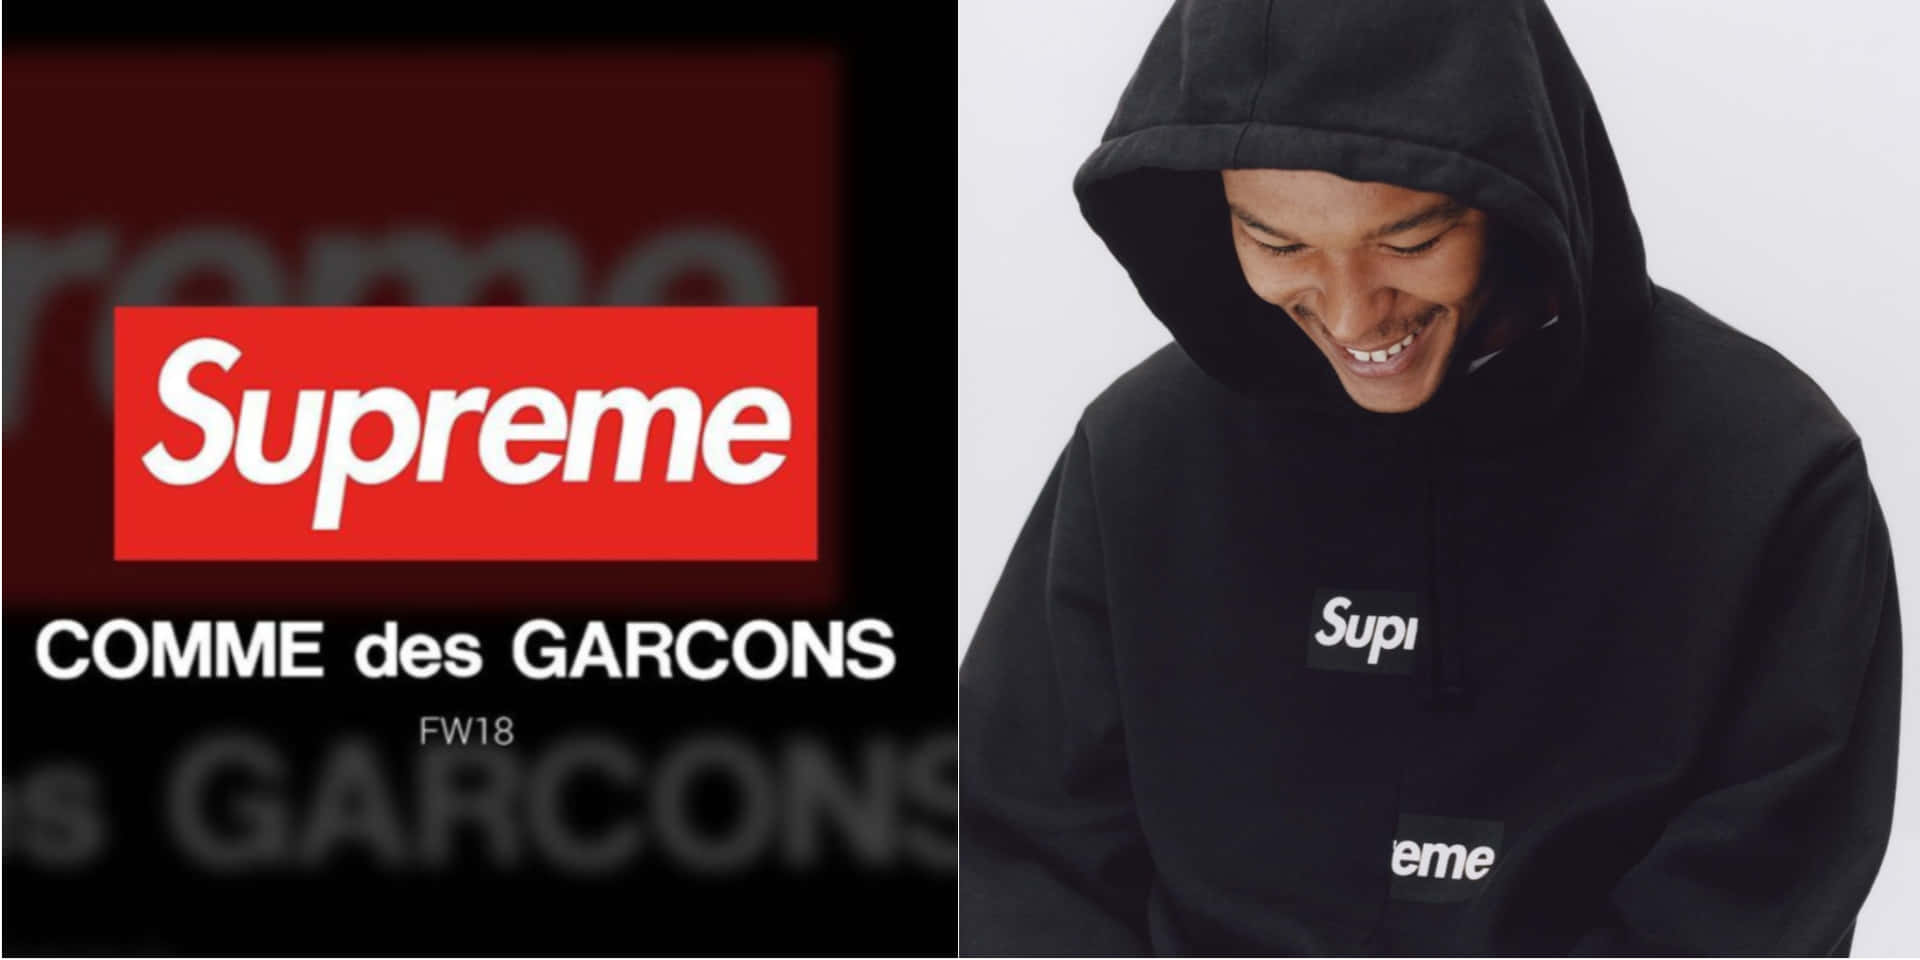 Represent Your Style with Supreme Streetwear